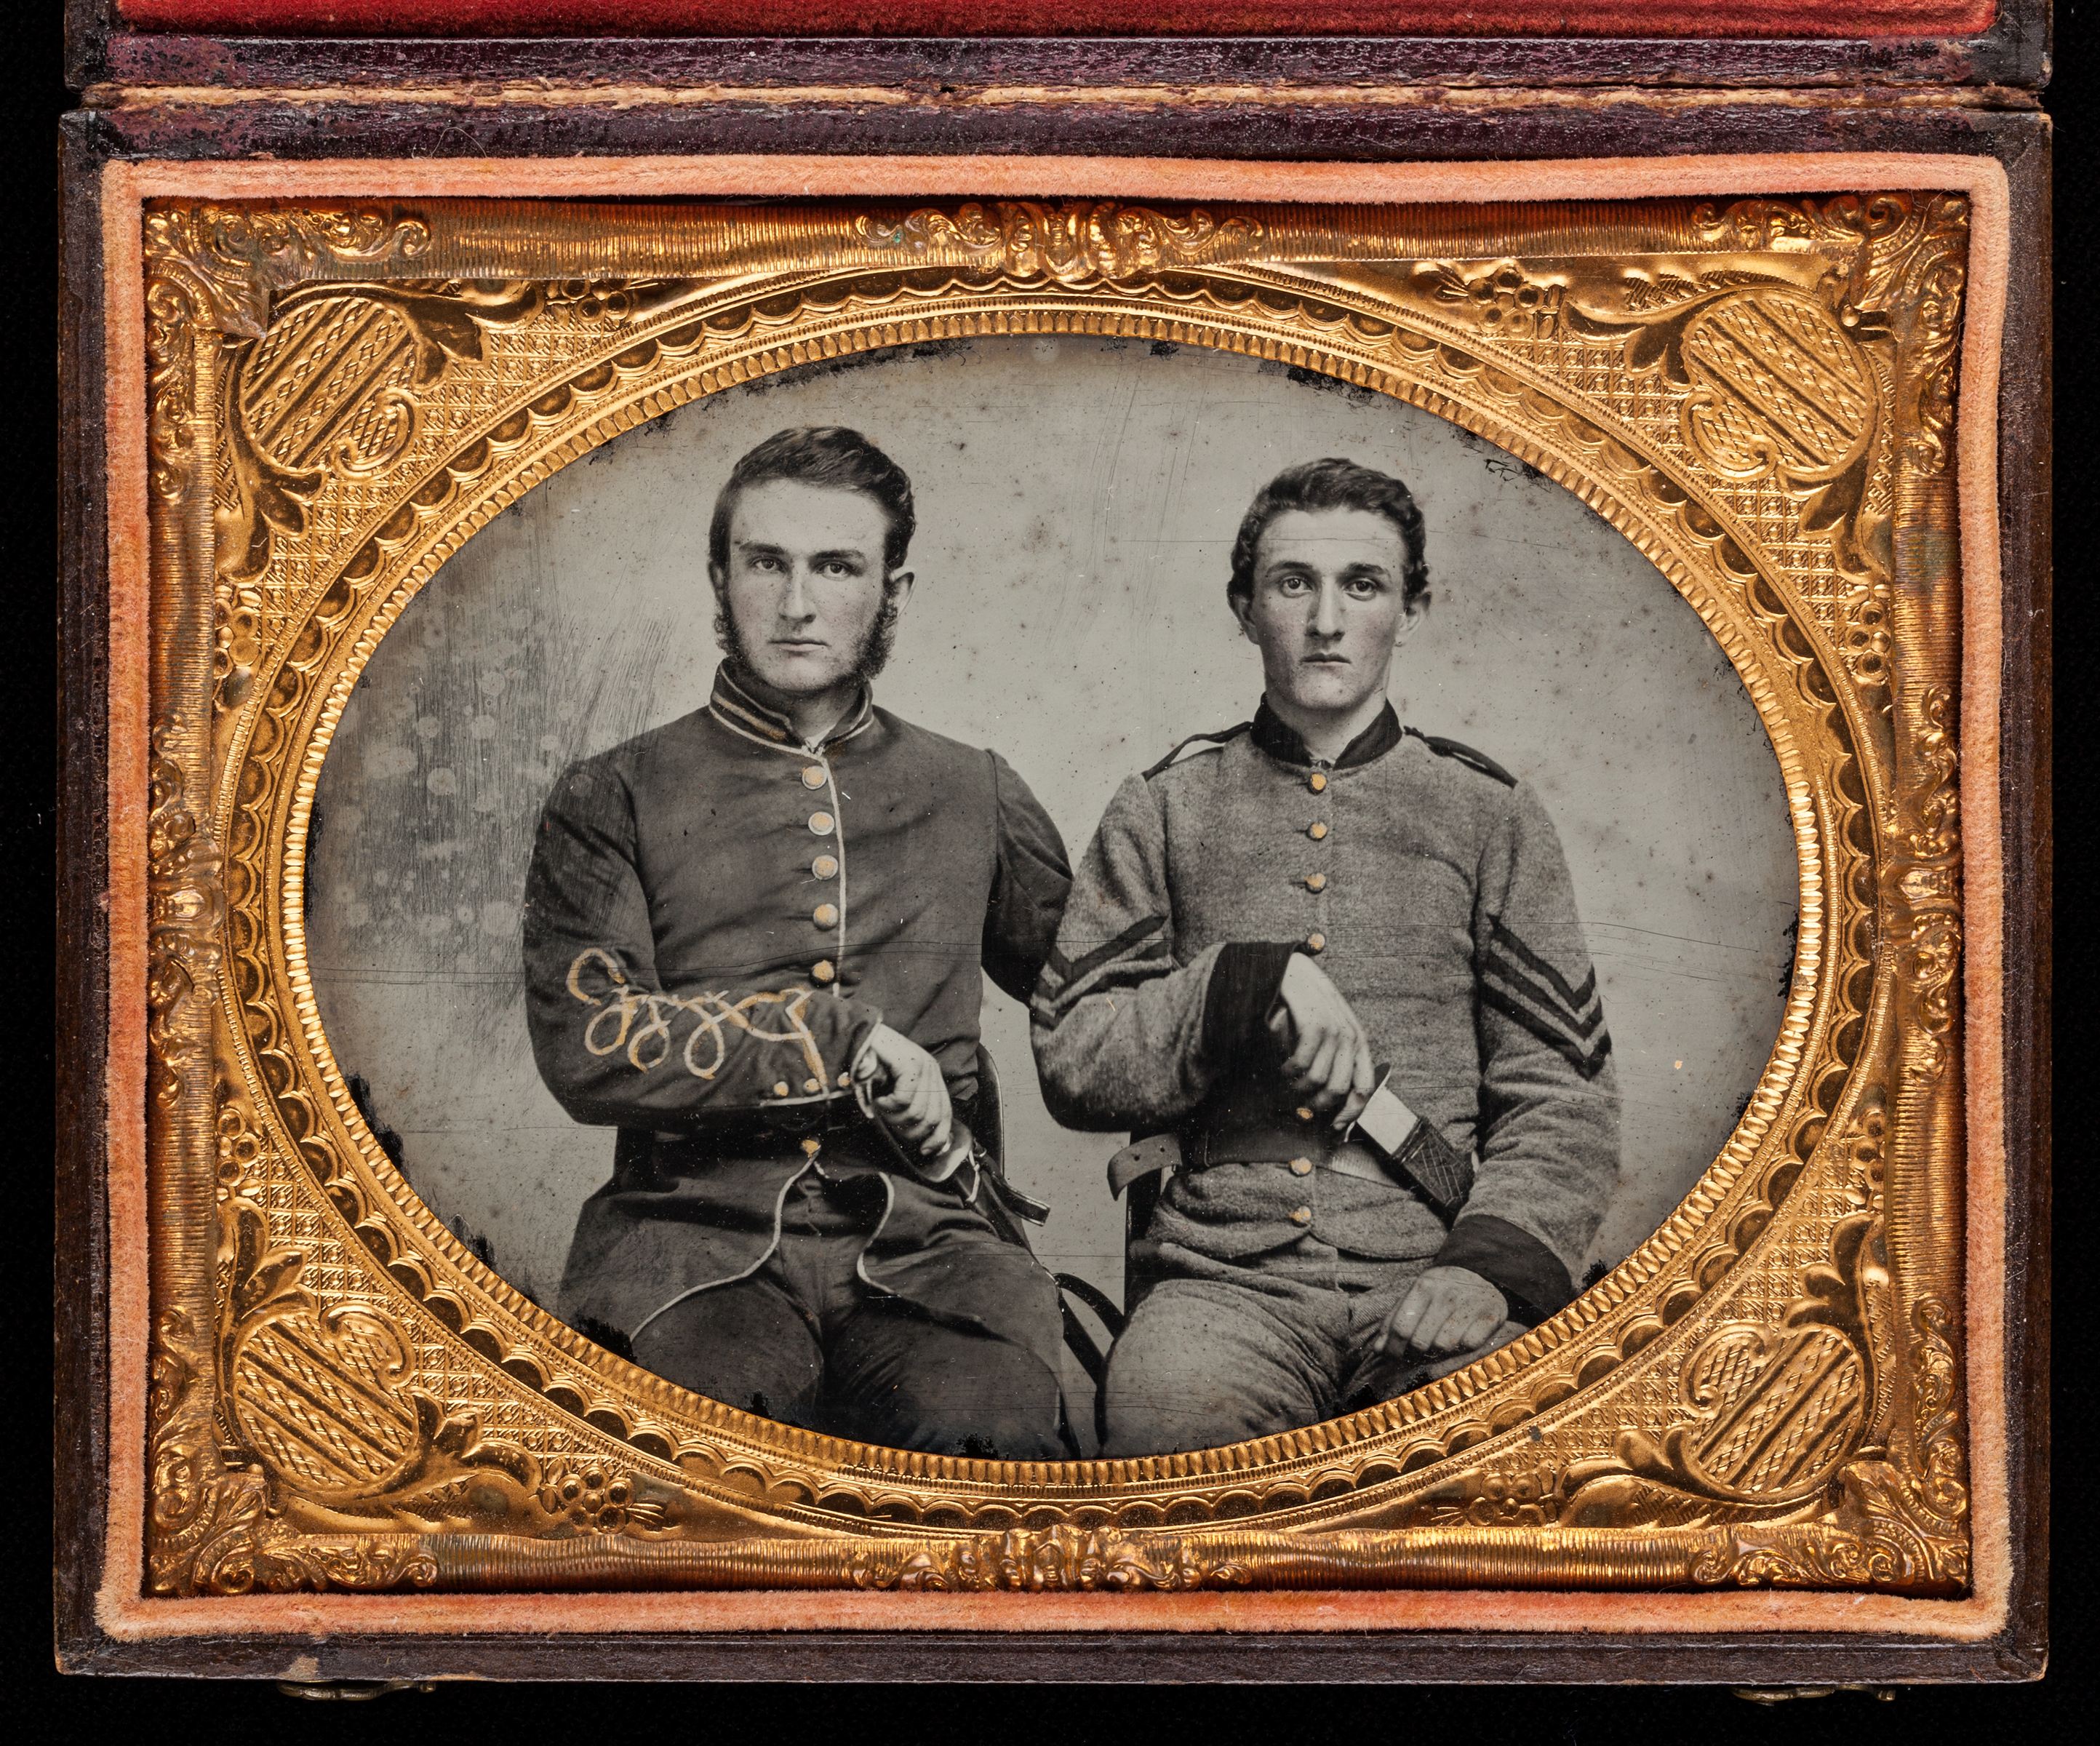 CIVIL WAR UNION SOLDIERS CAMP PHOTO PHOTOGRAPH ART POSTER PRINT ON REAL CANVAS